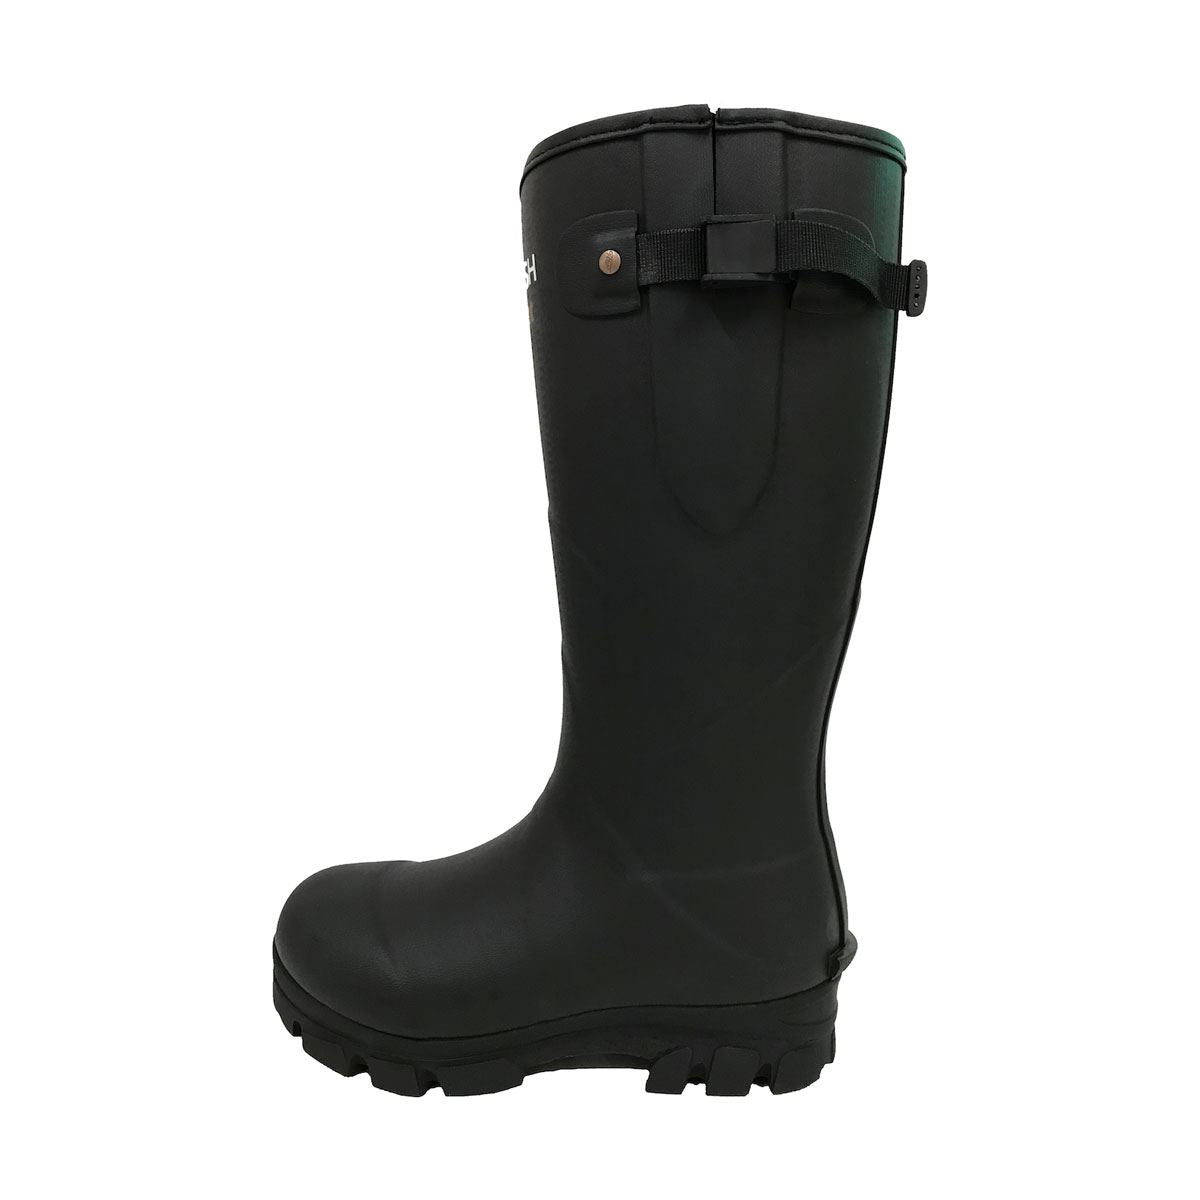 Rockfish Neoprene Lined Walkabout Wellington Boots - Just Horse Riders